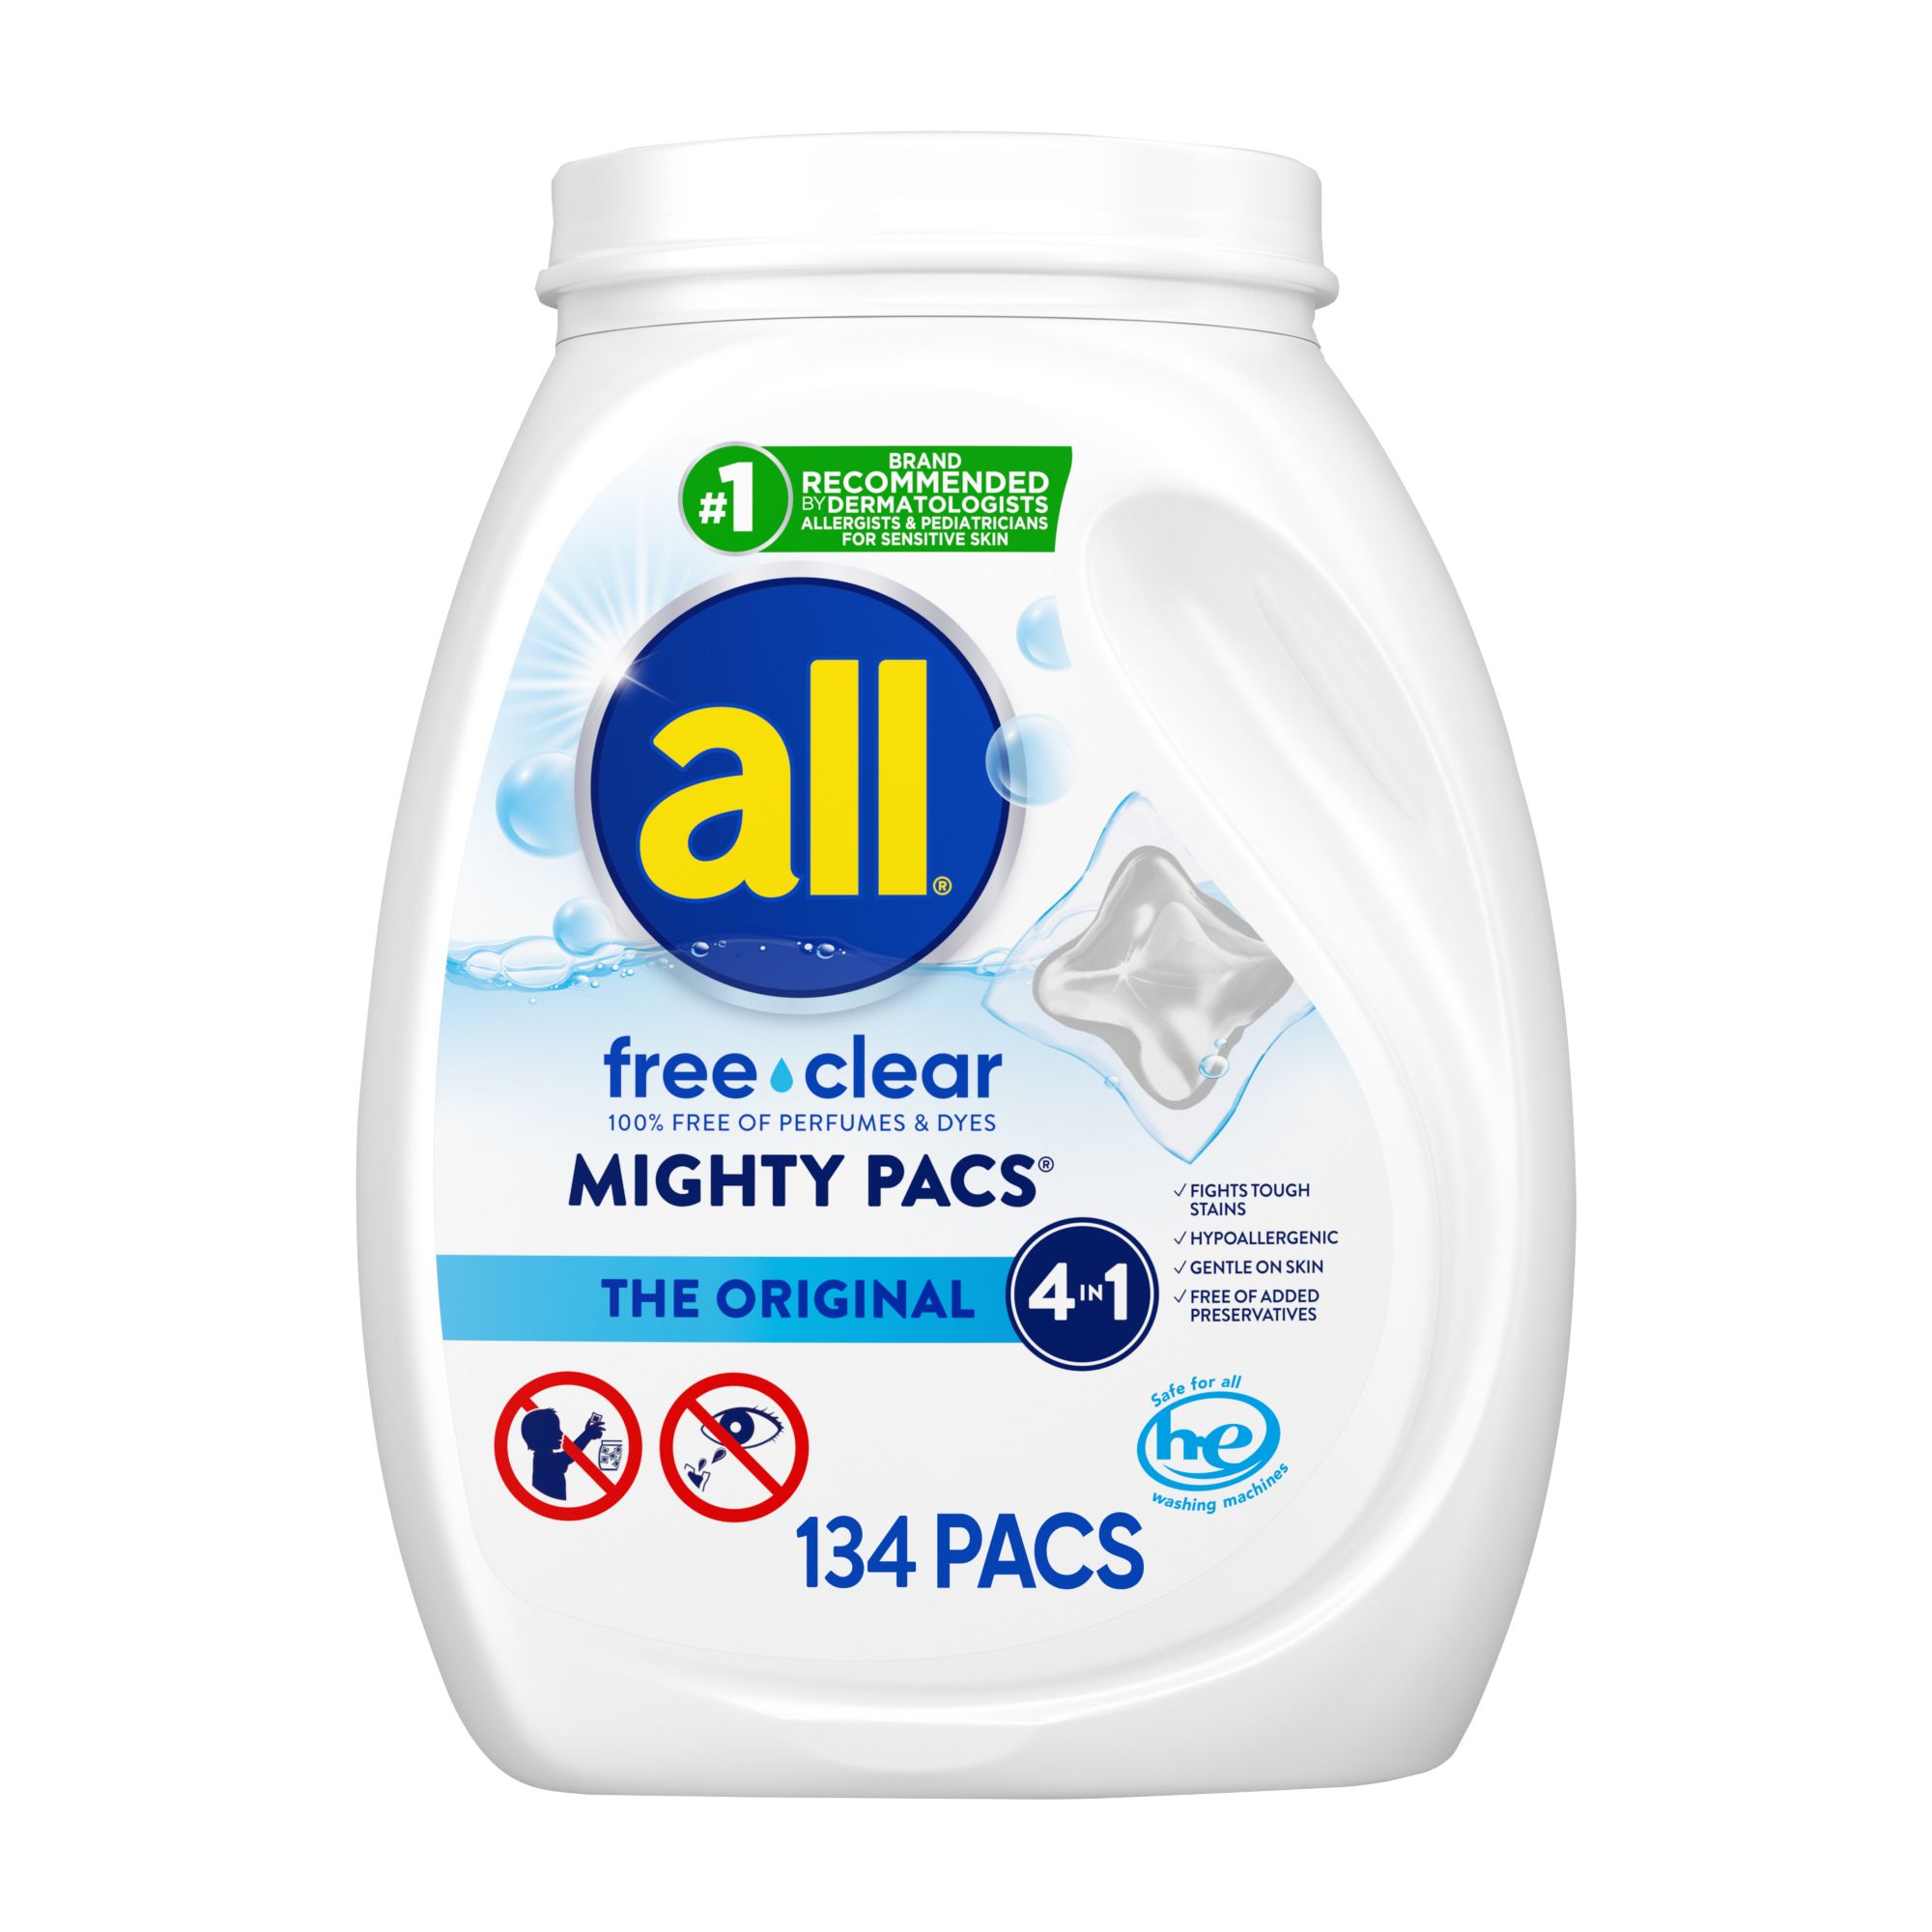 all Free and Clear Stainlifters Mighty Pacs Laundry Detergent, 134 ct.